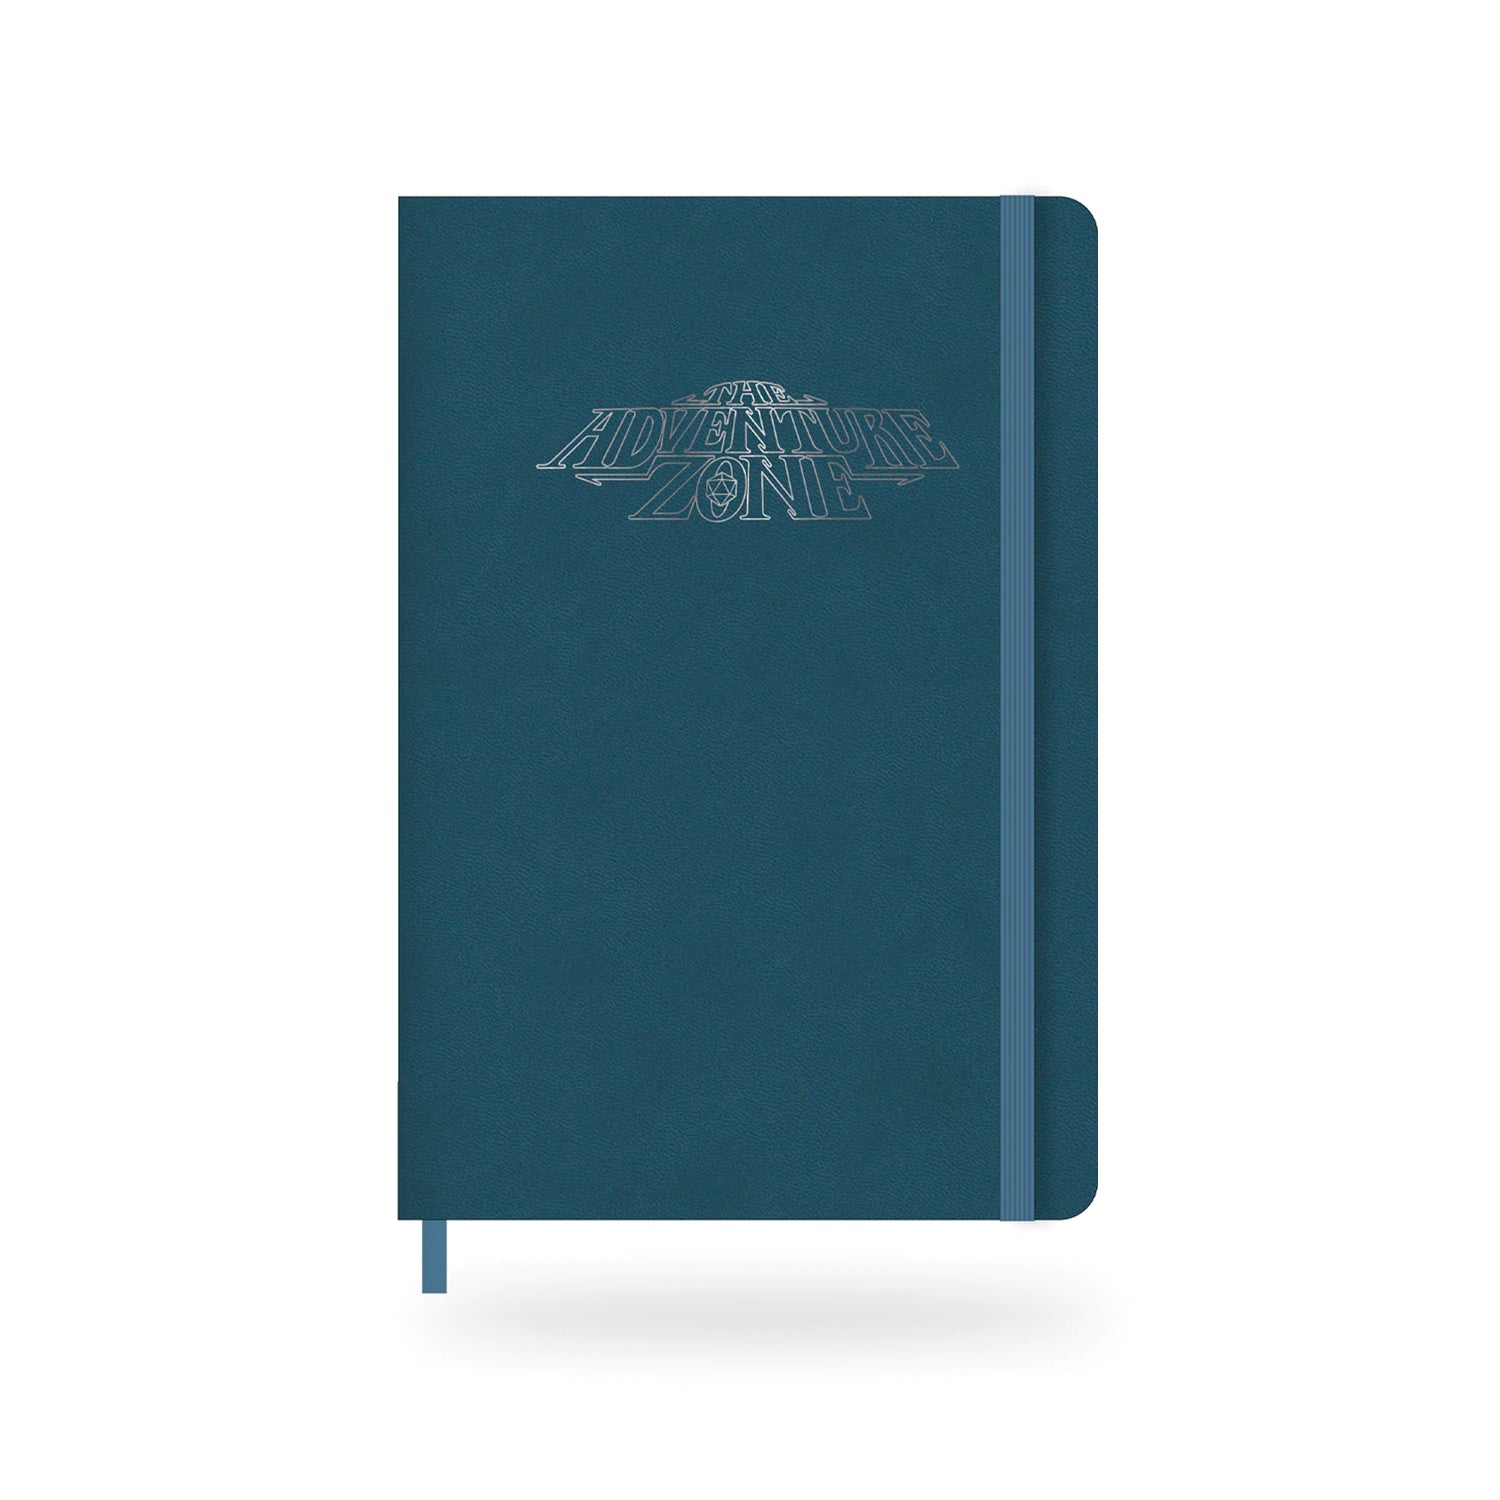 A teal notebook embossed with the TAZ logo. It has an elastic band holding it shut.